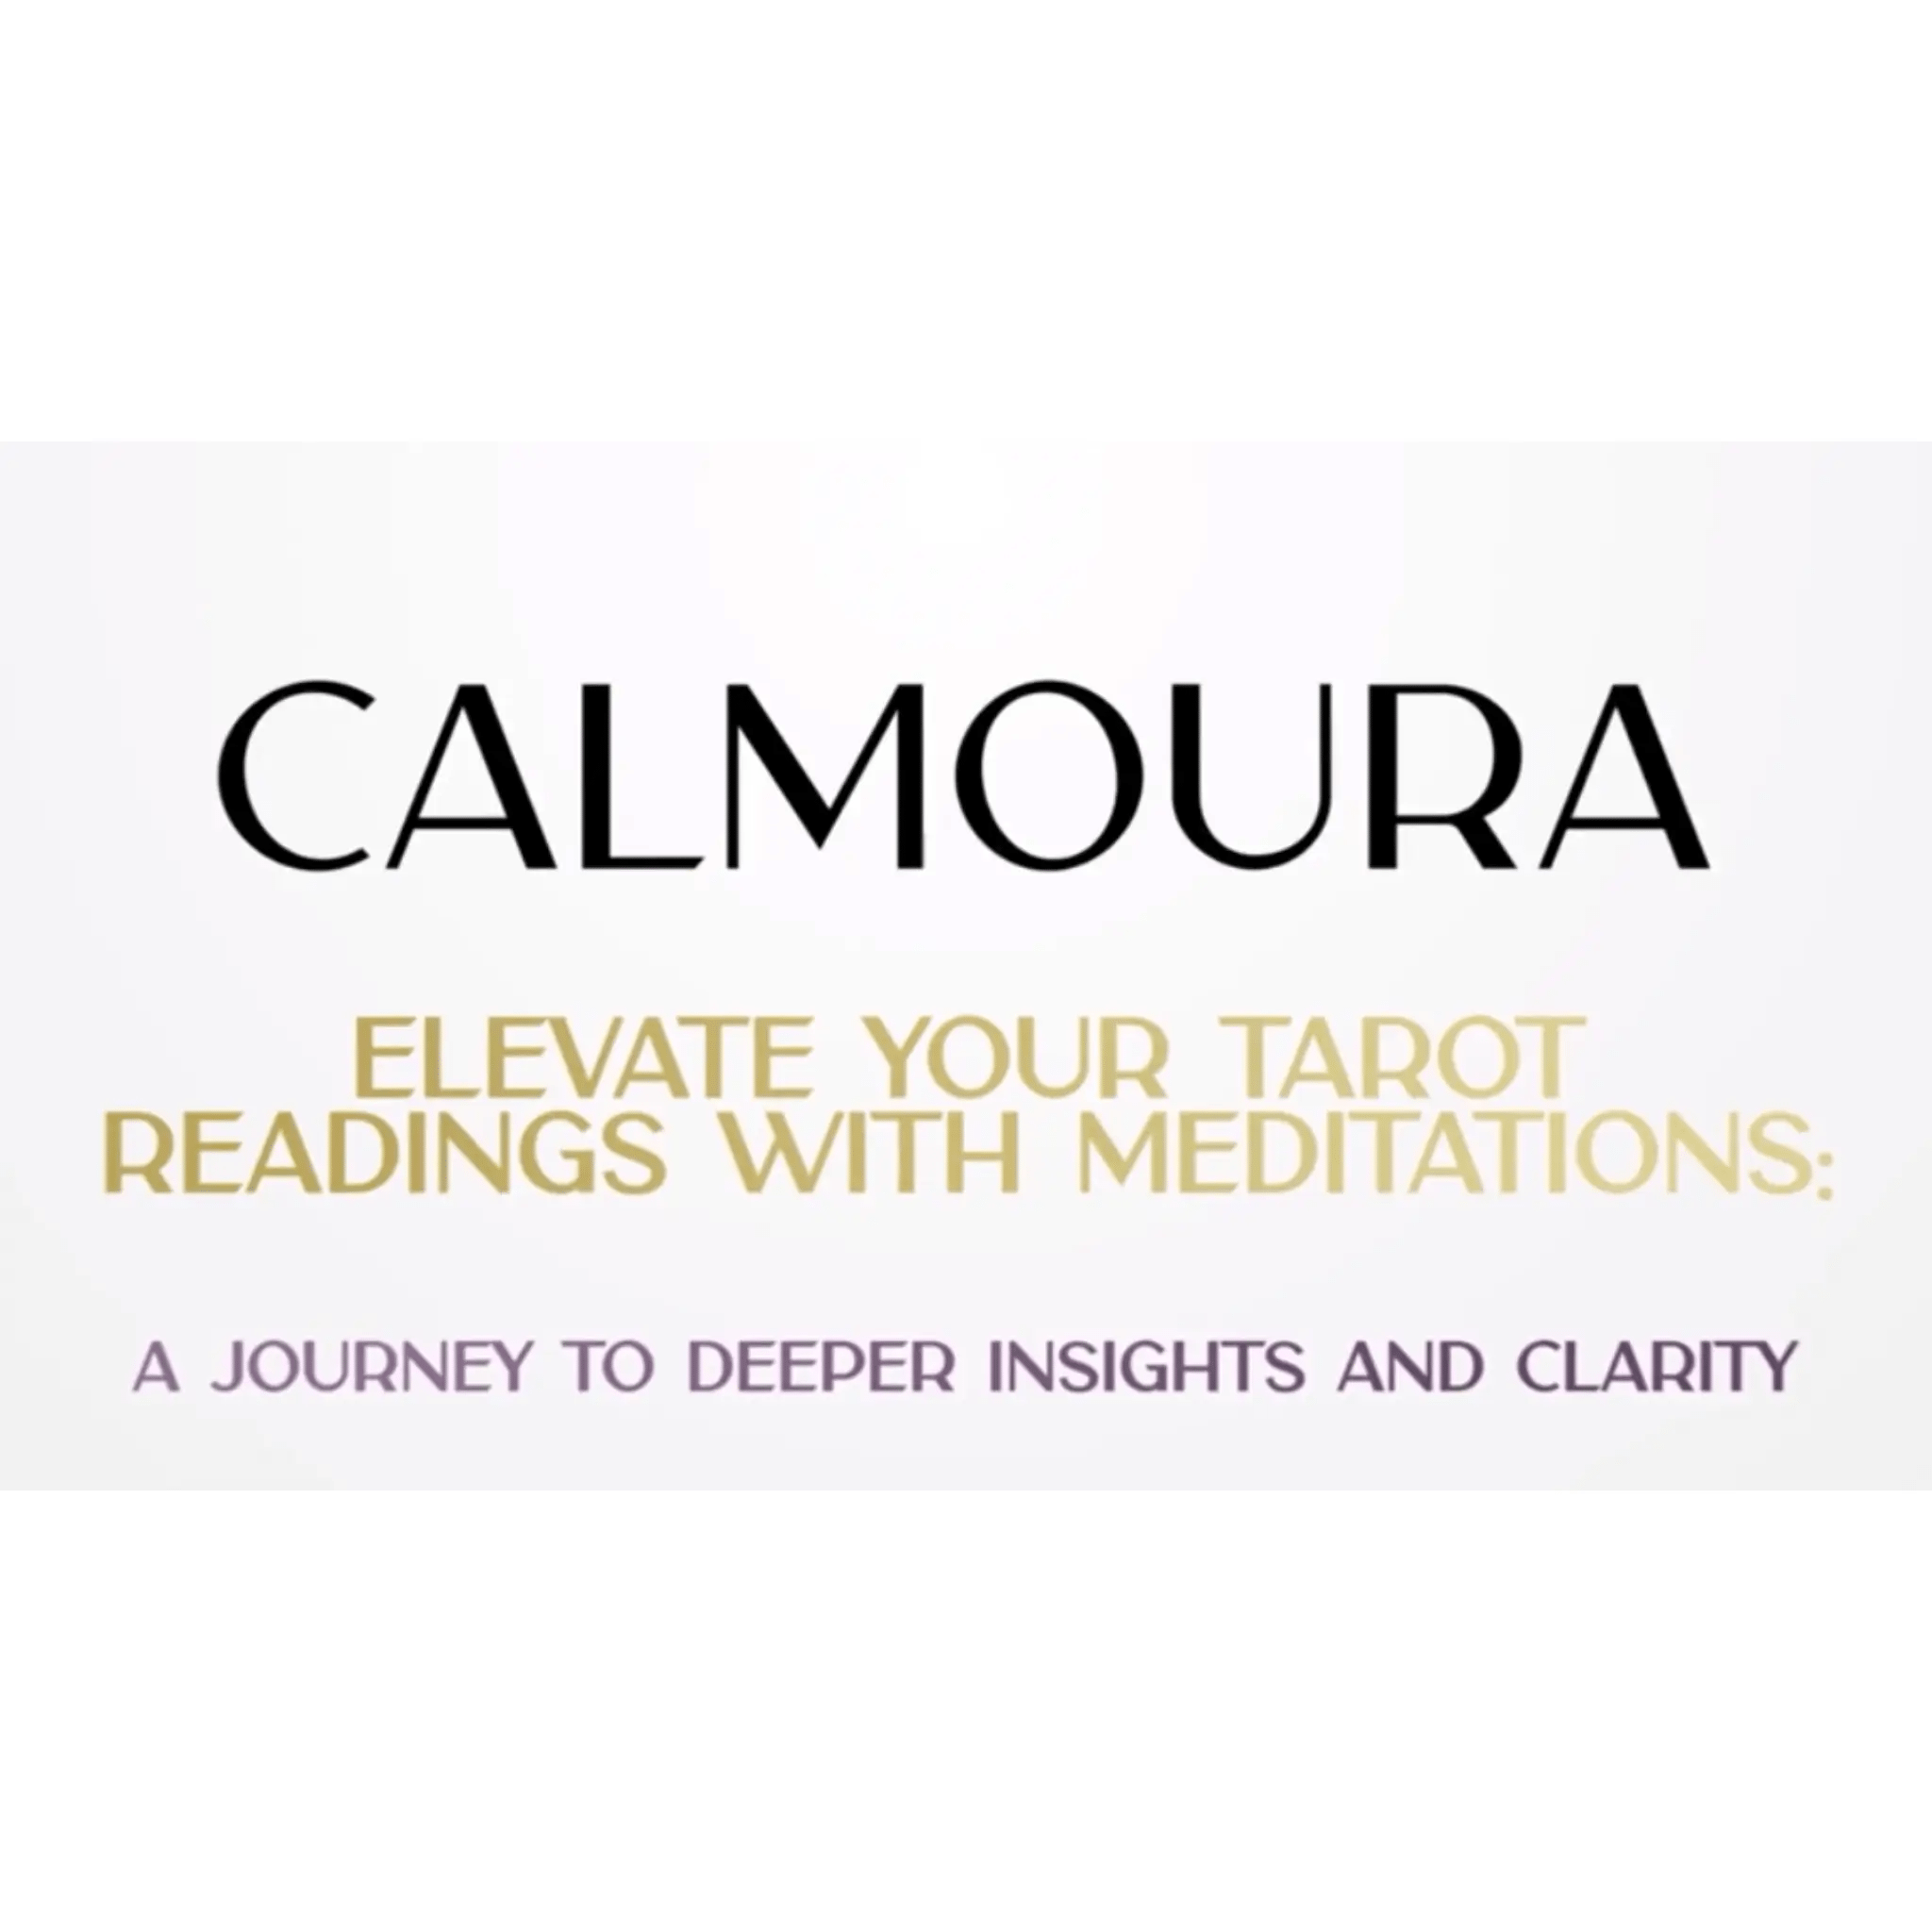 Calmoura Digital Elevate Your Tarot Readings with Meditations